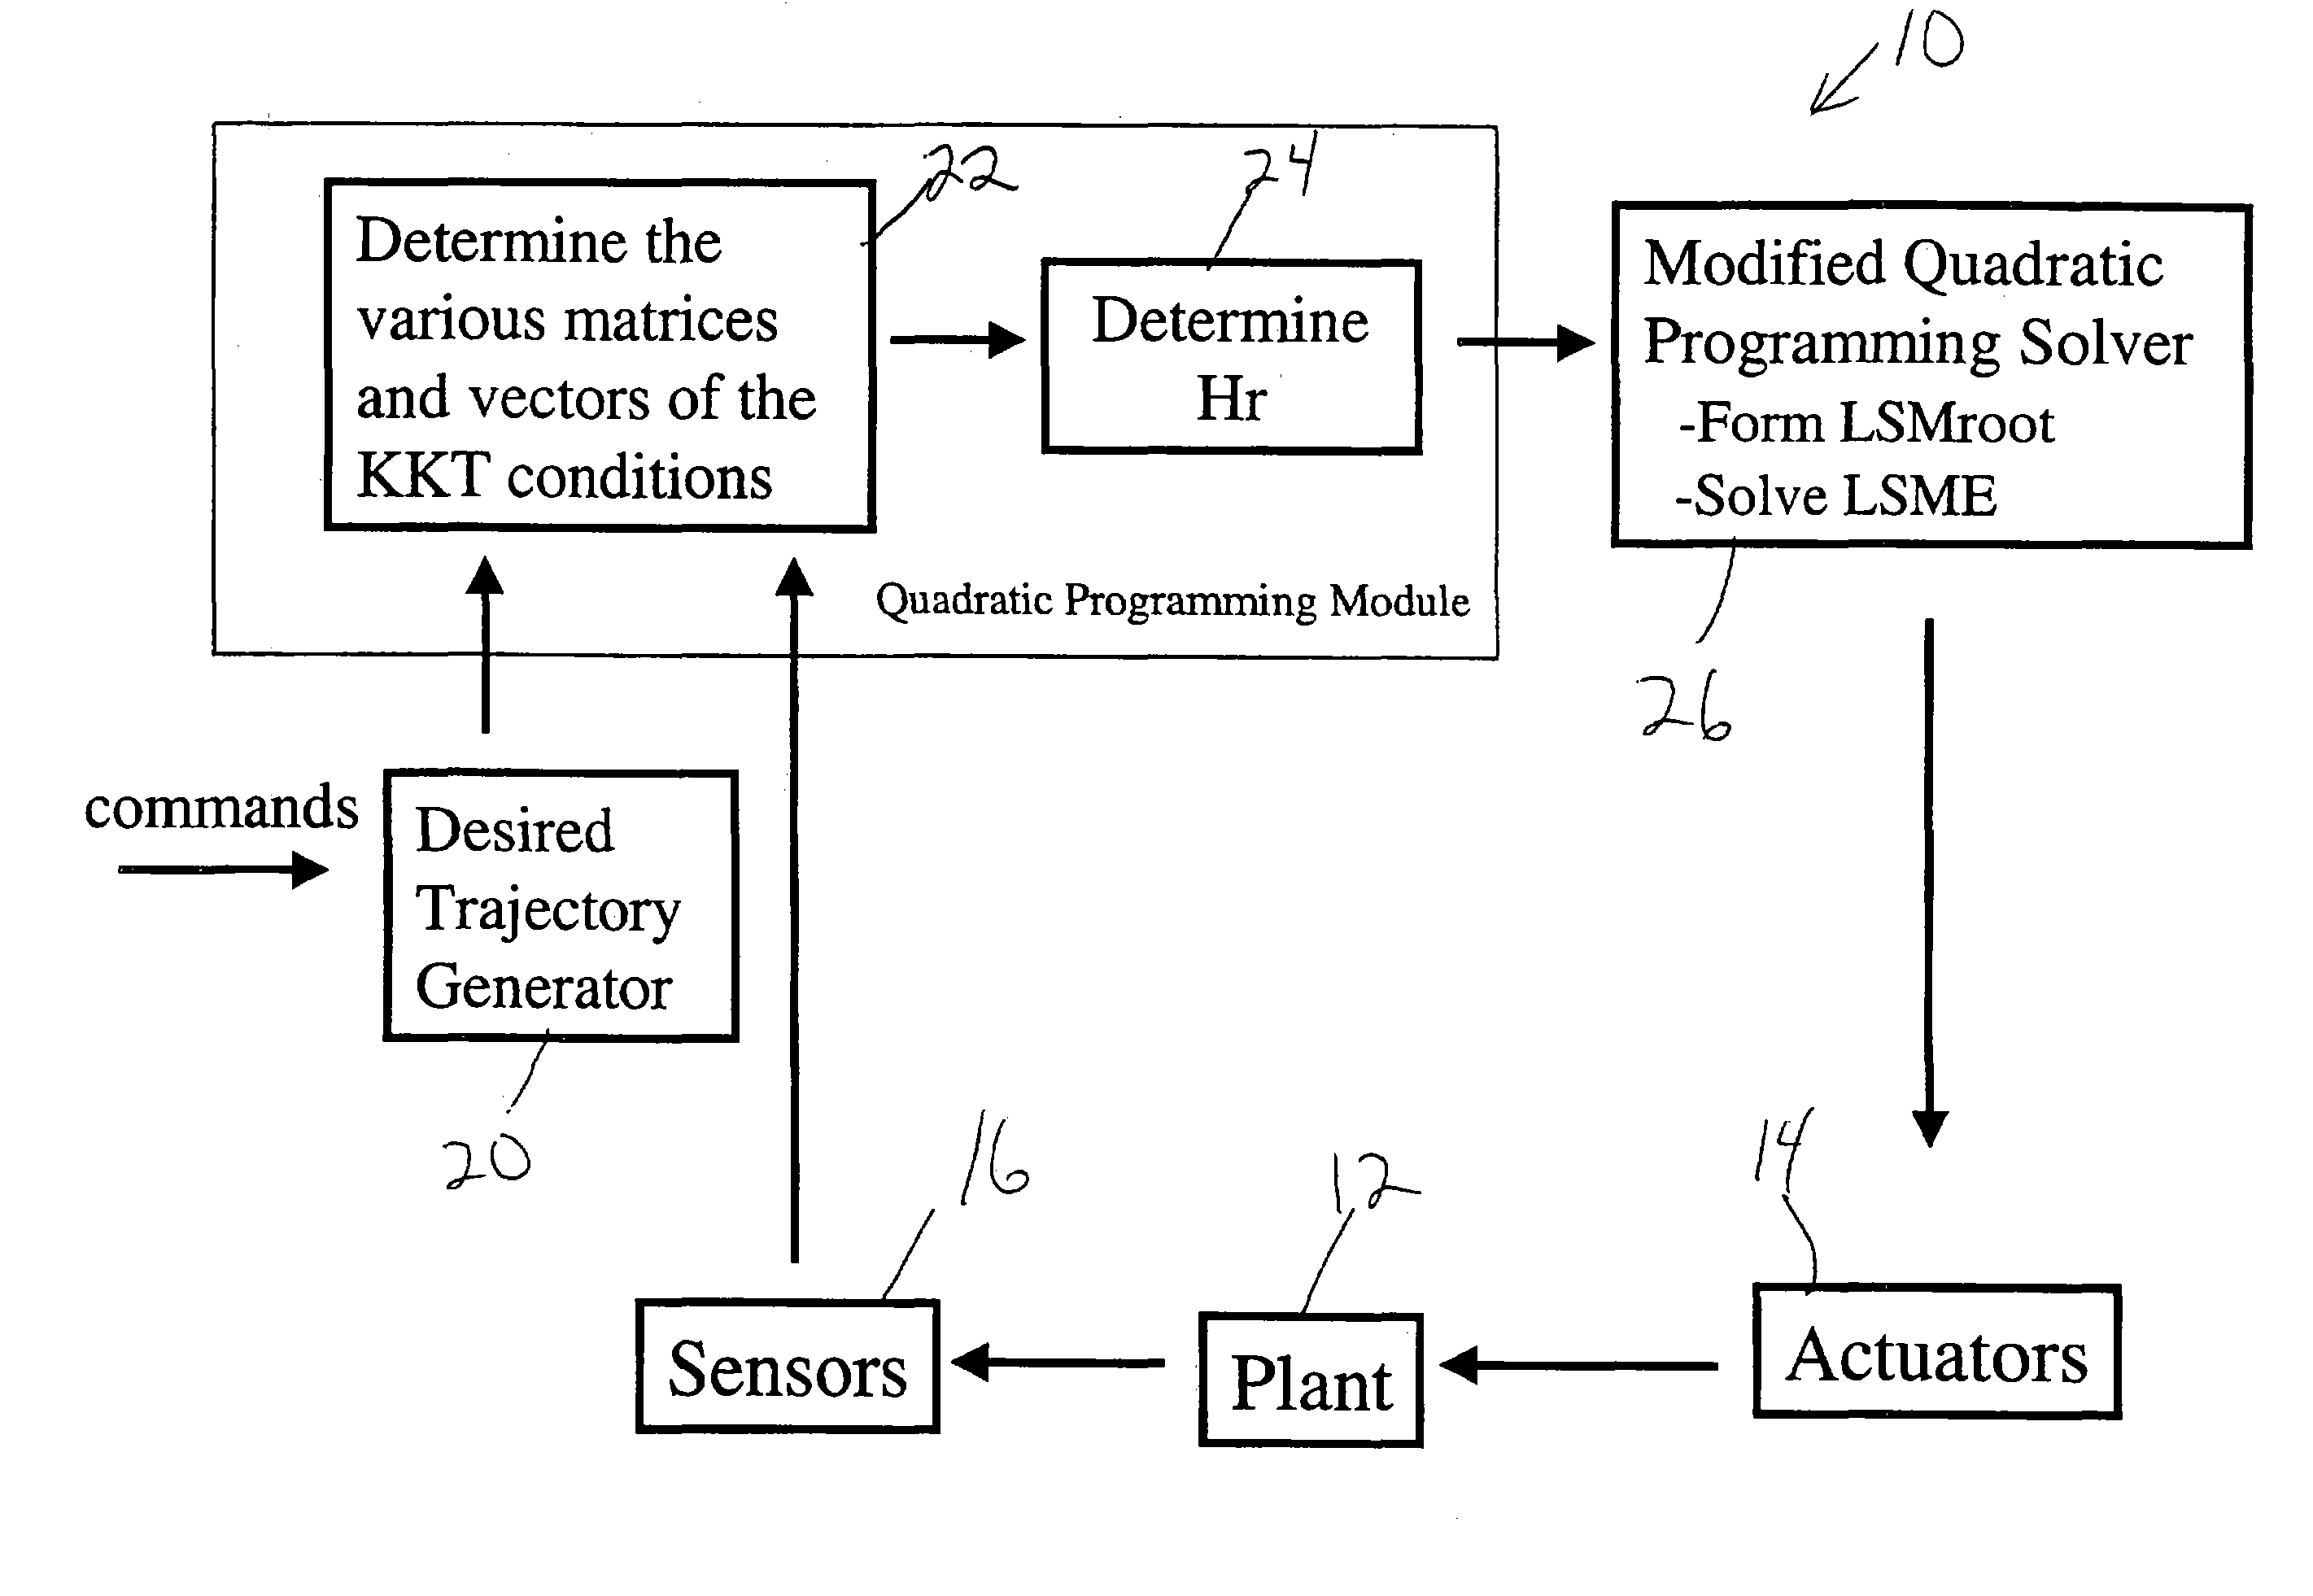 Square root method for computationally efficient model predictive control